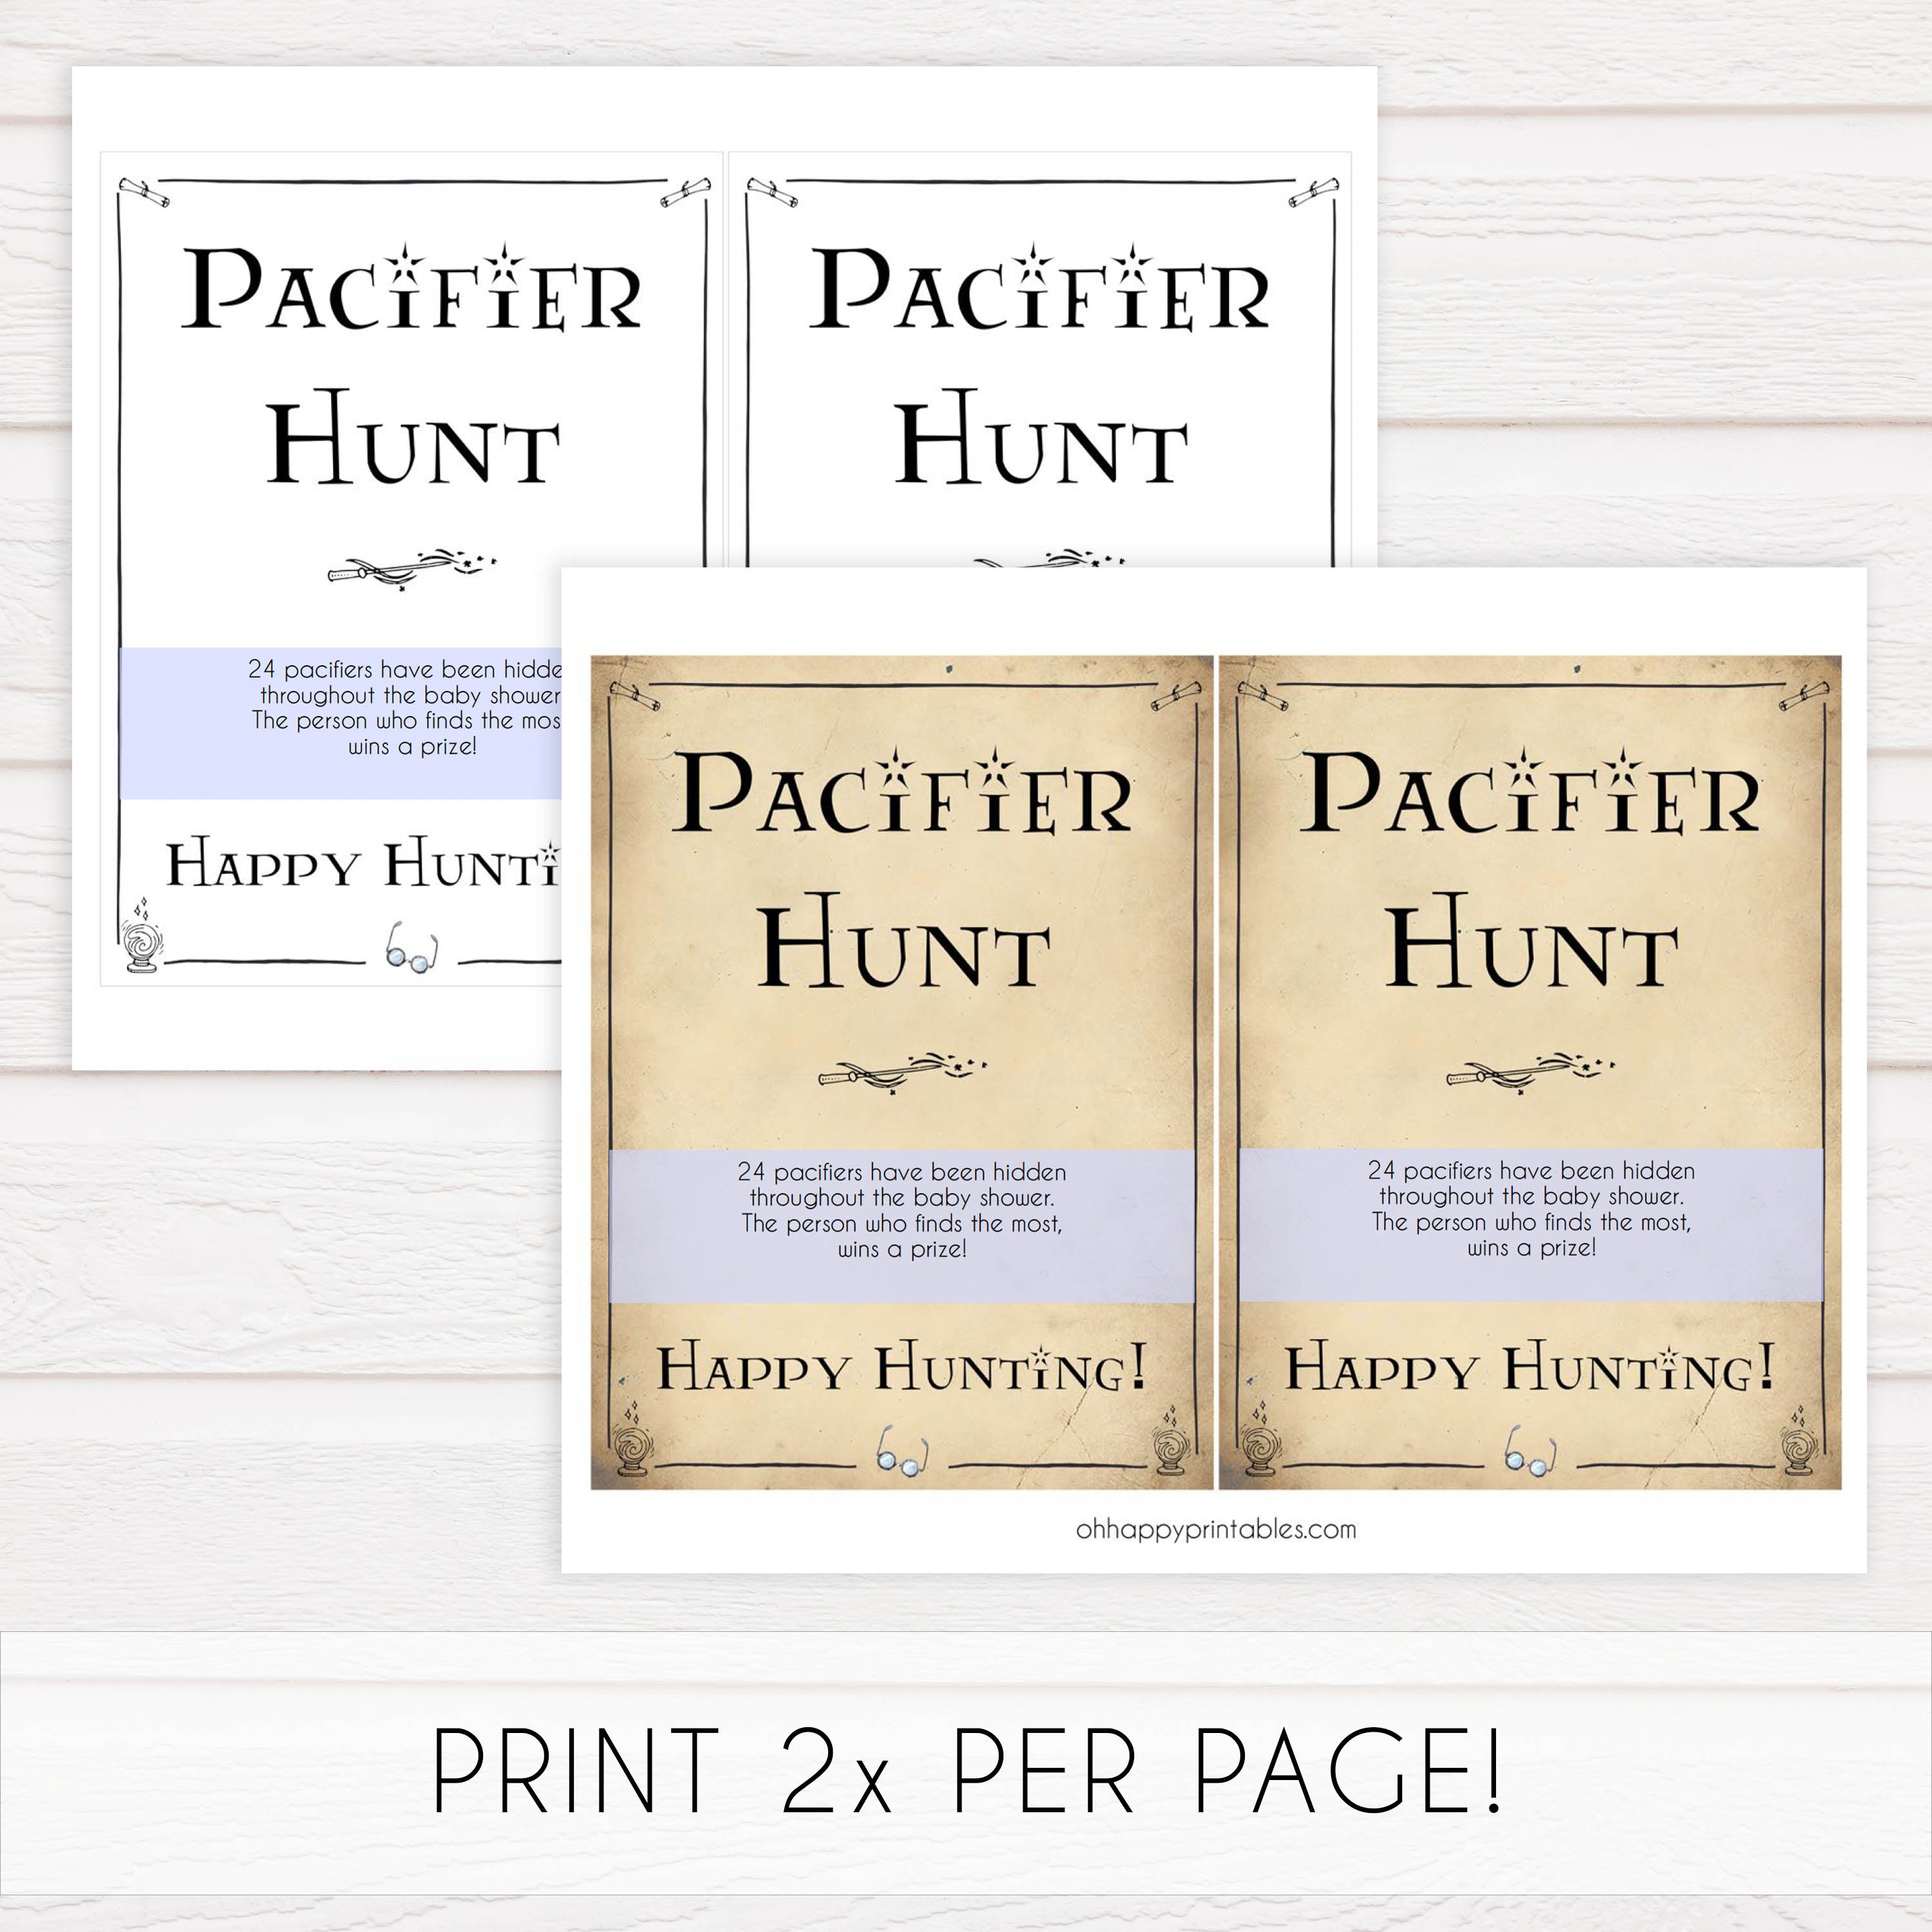 Pacifier Hunt Game, Wizard baby shower games, printable baby shower games, Harry Potter baby games, Harry Potter baby shower, fun baby shower games,  fun baby ideas